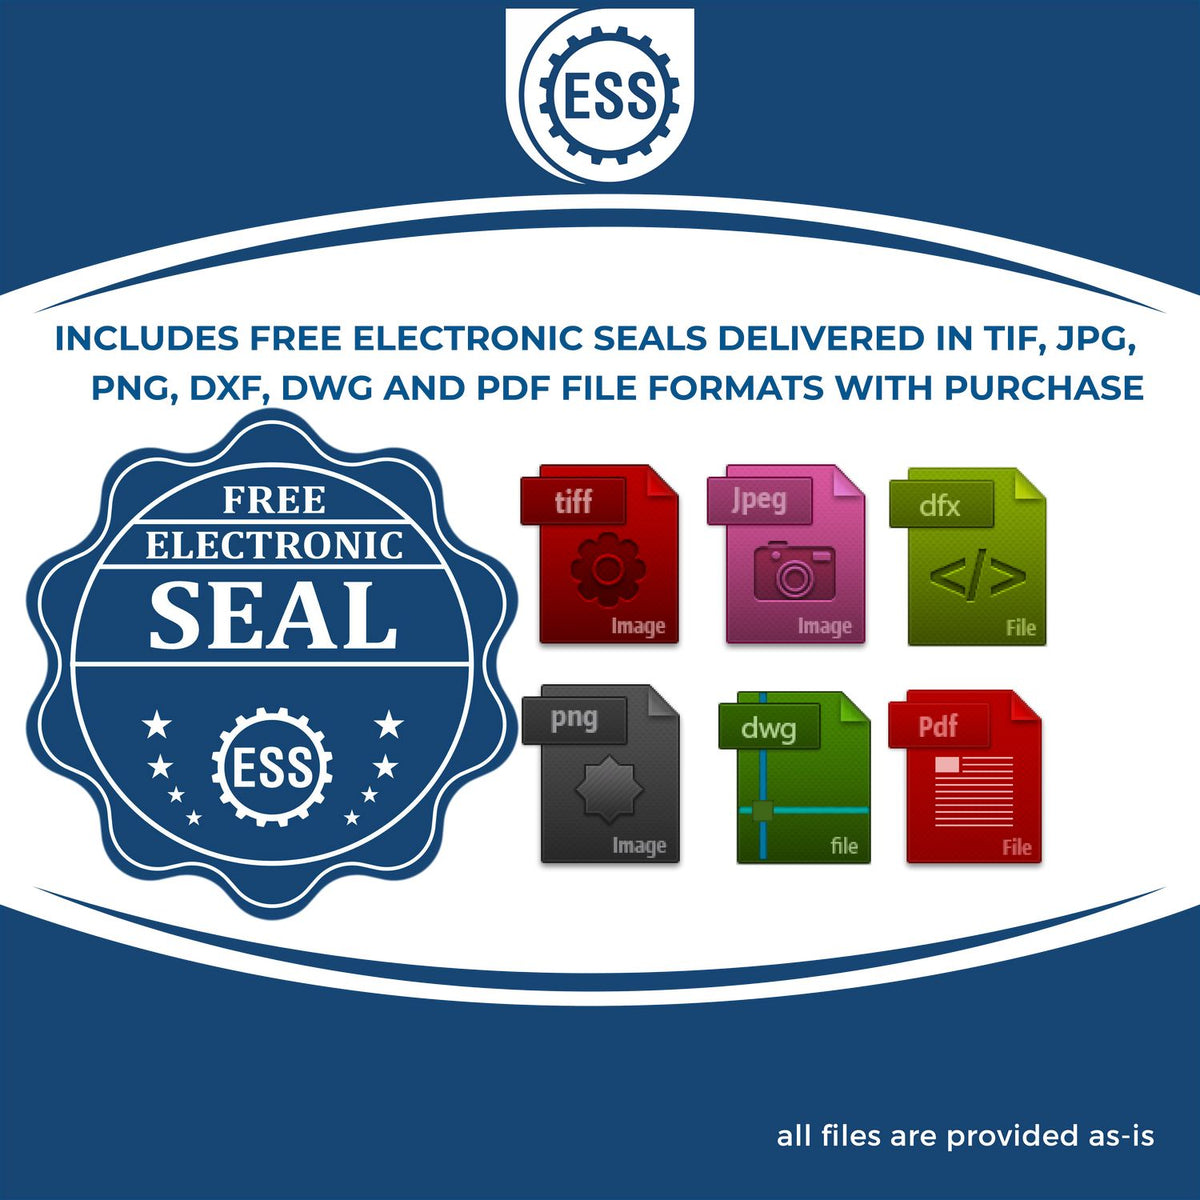 An infographic for the free electronic seal for the Self-Inking Kansas Geologist Stamp illustrating the different file type icons such as DXF, DWG, TIF, JPG and PNG.